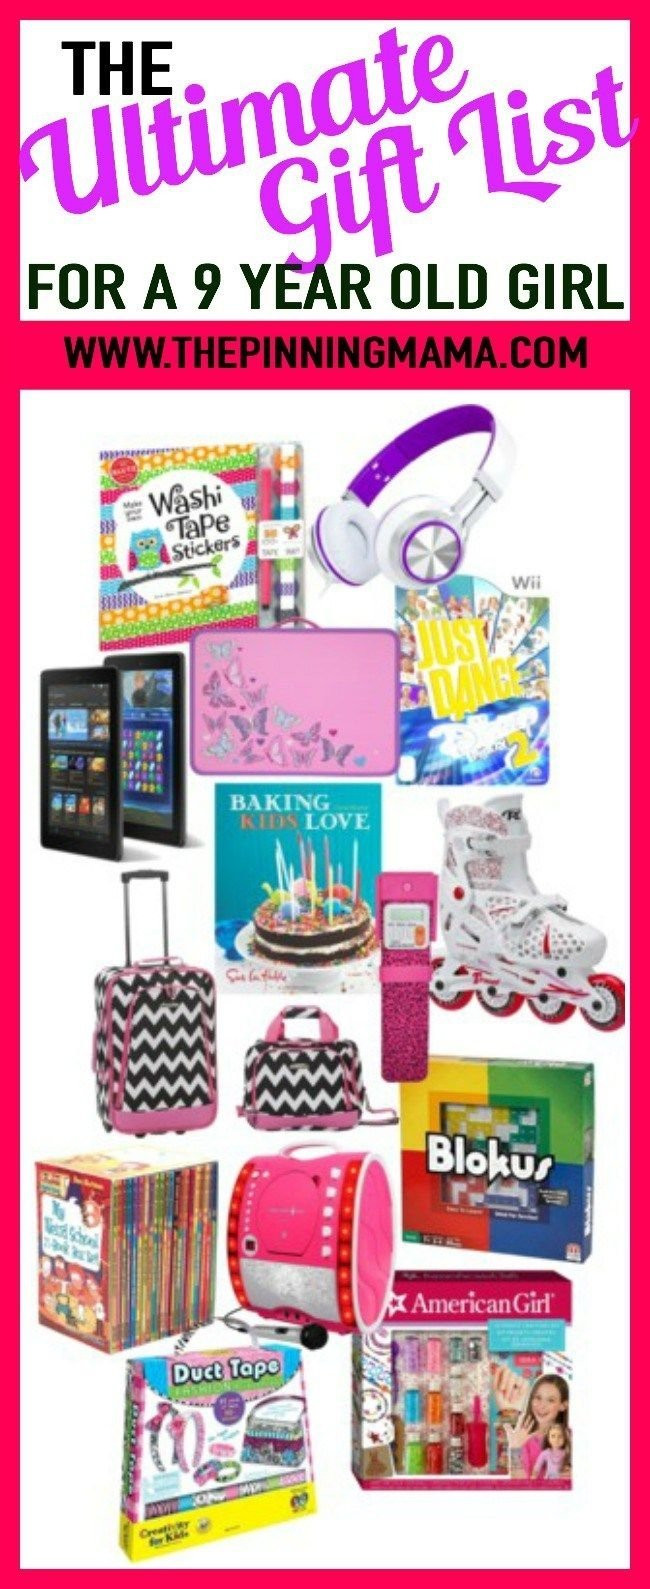 Gift Ideas For Girls Age 10
 10 Lovable Gift Ideas For Girls Age 9 2020